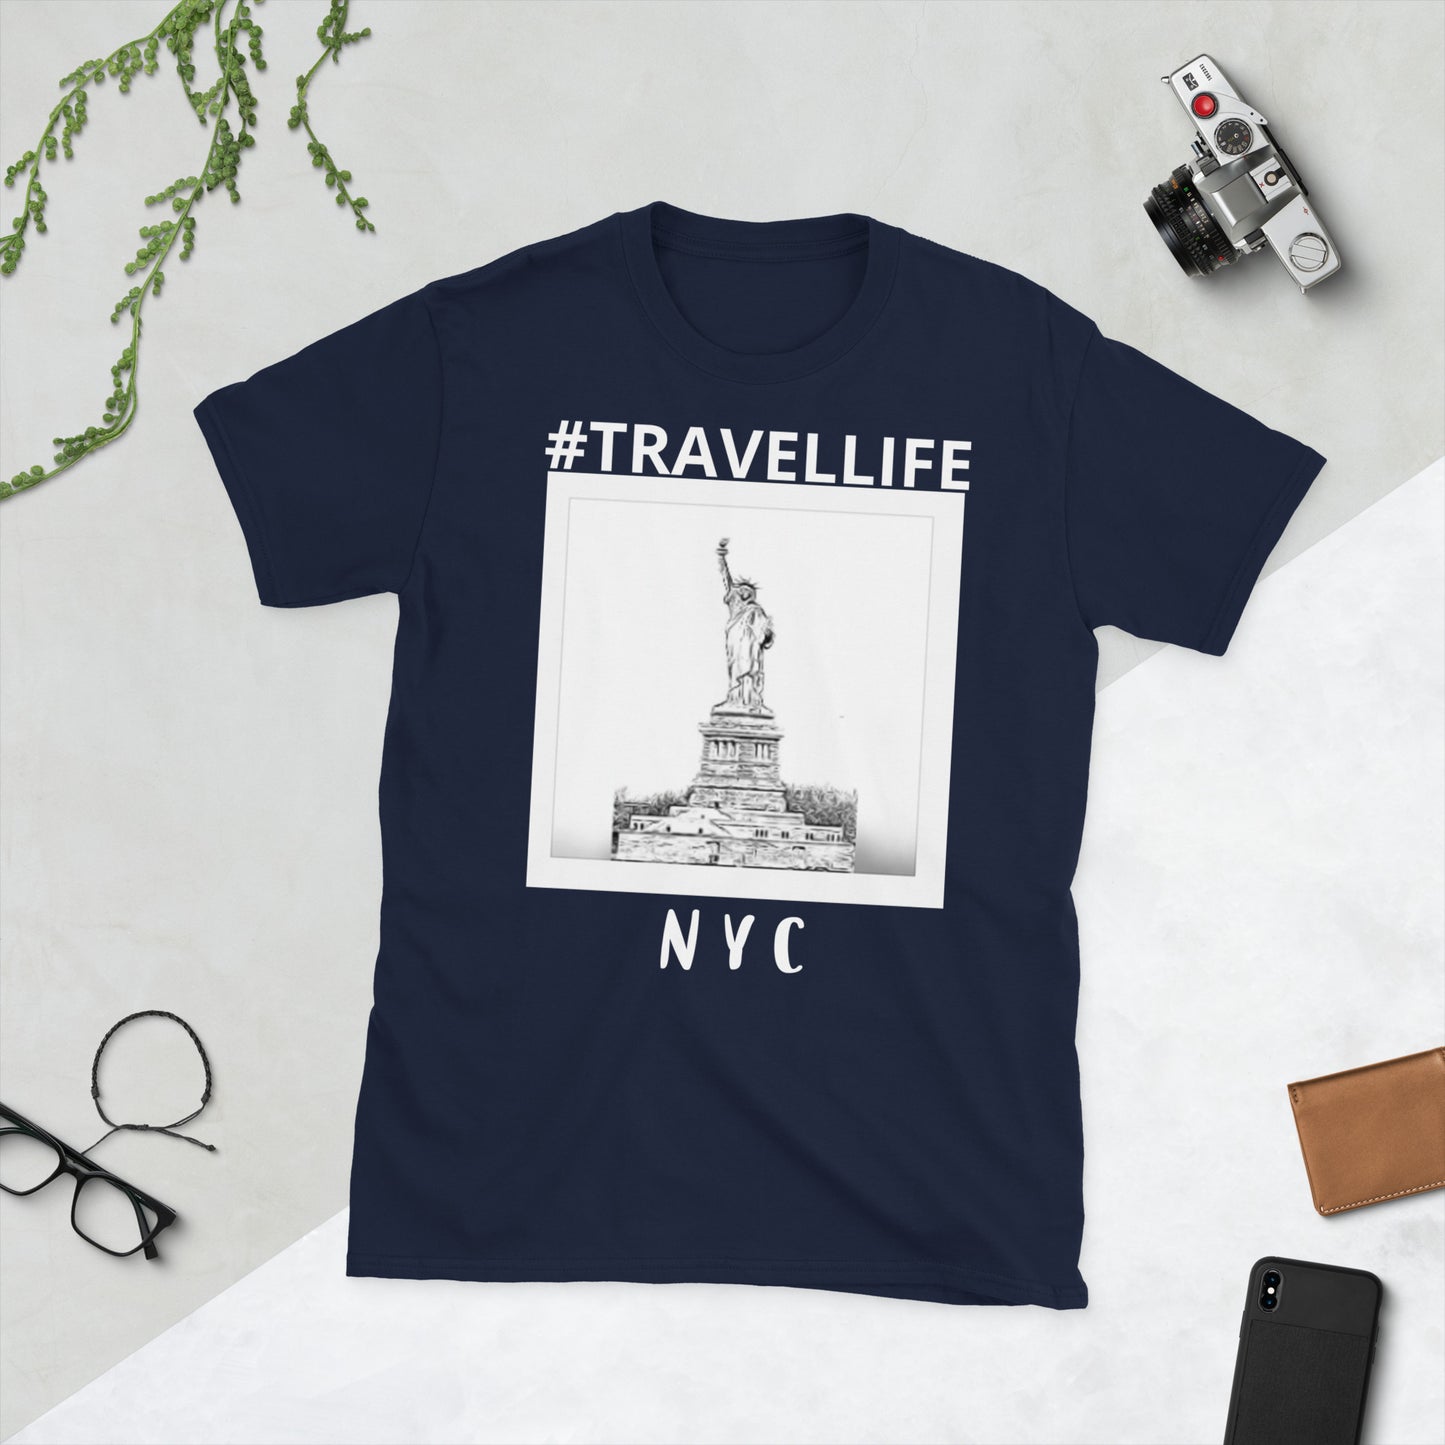 #Travellife NYC Statue of Liberty Unisex T-Shirt white text